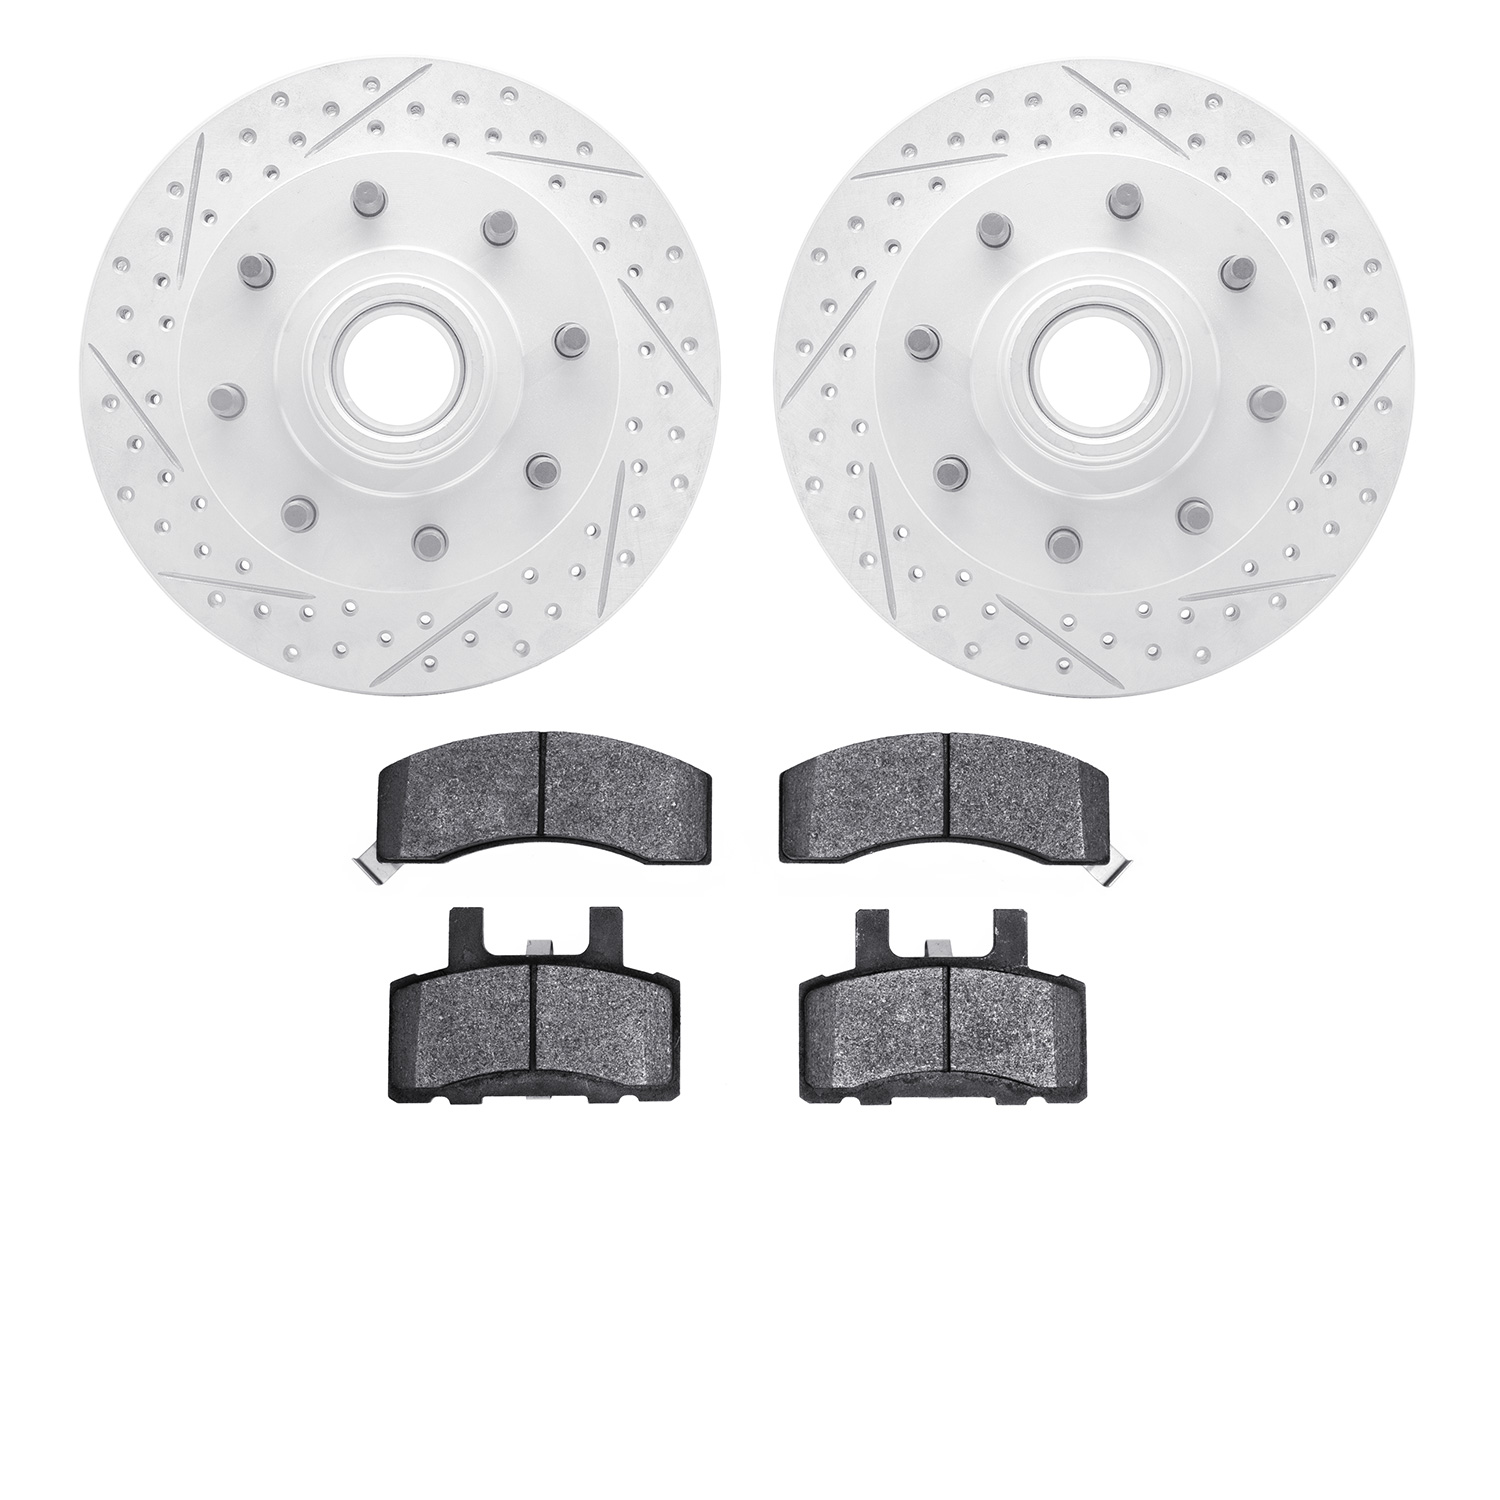 2502-48020 Geoperformance Drilled/Slotted Rotors w/5000 Advanced Brake Pads Kit, 1992-2002 GM, Position: Front